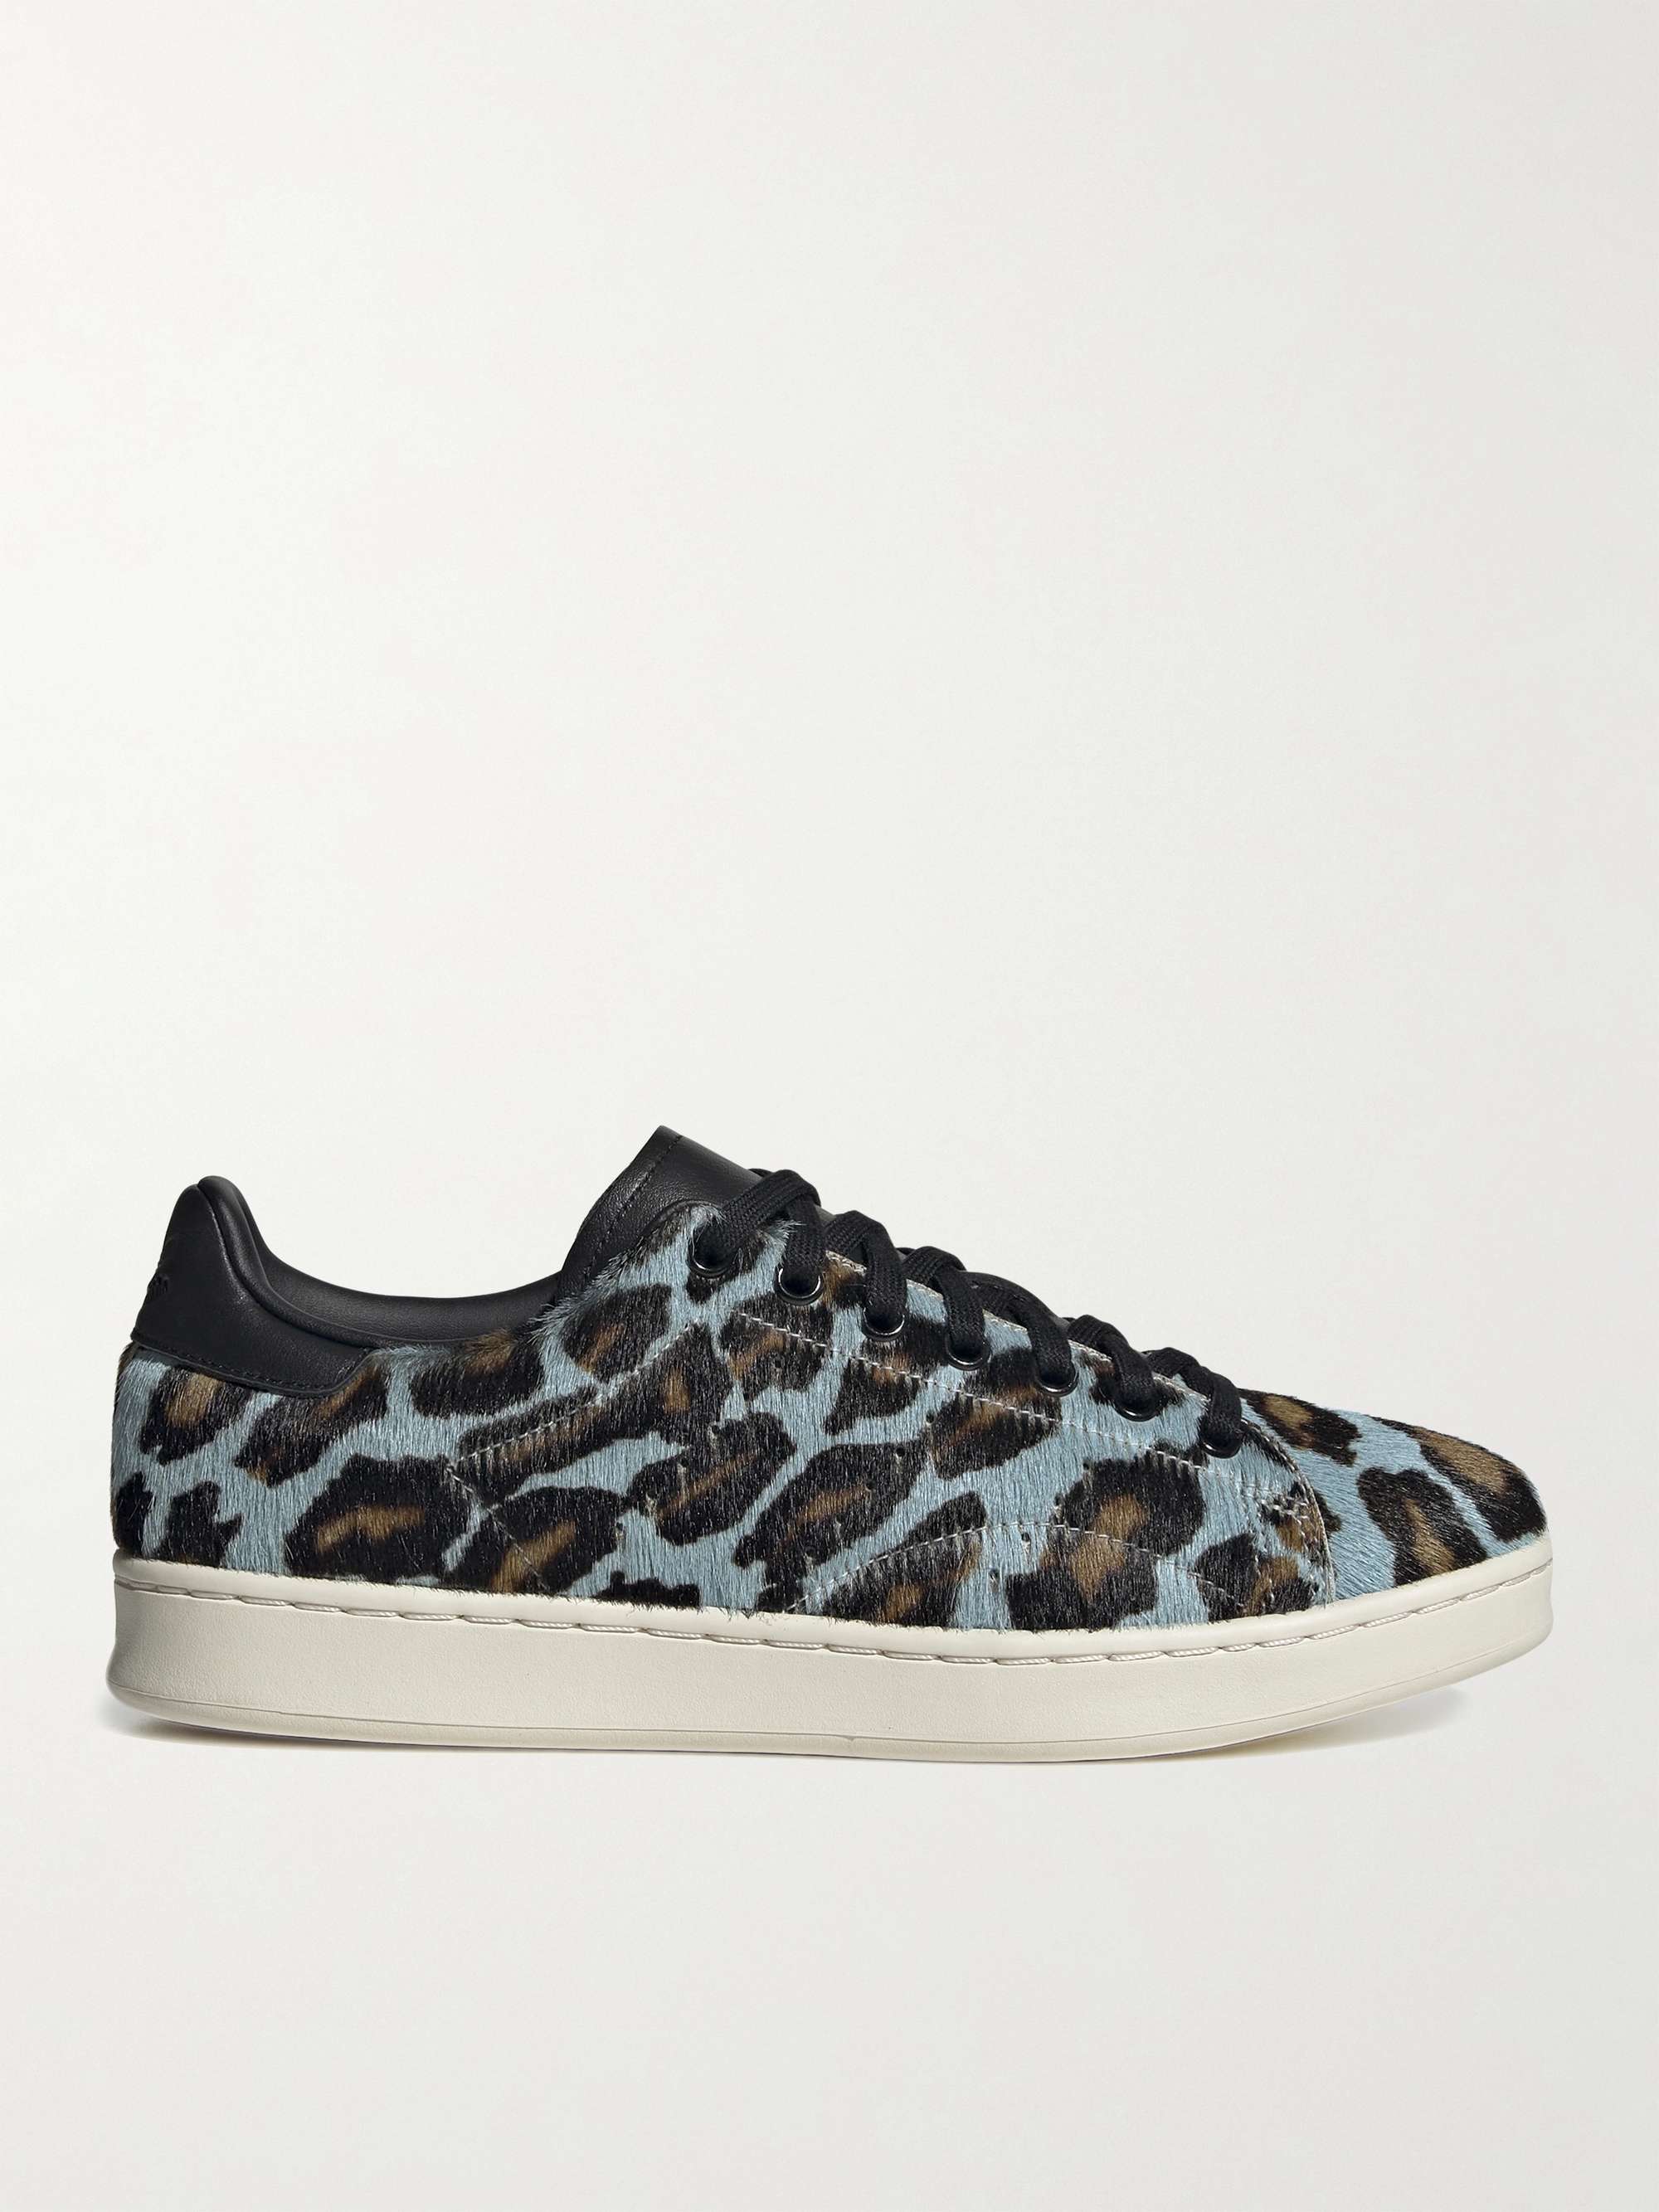 Blue Stan Smith H Leather-Trimmed Leopard-Print Calf Hair Sneakers | ADIDAS  ORIGINALS | MR PORTER